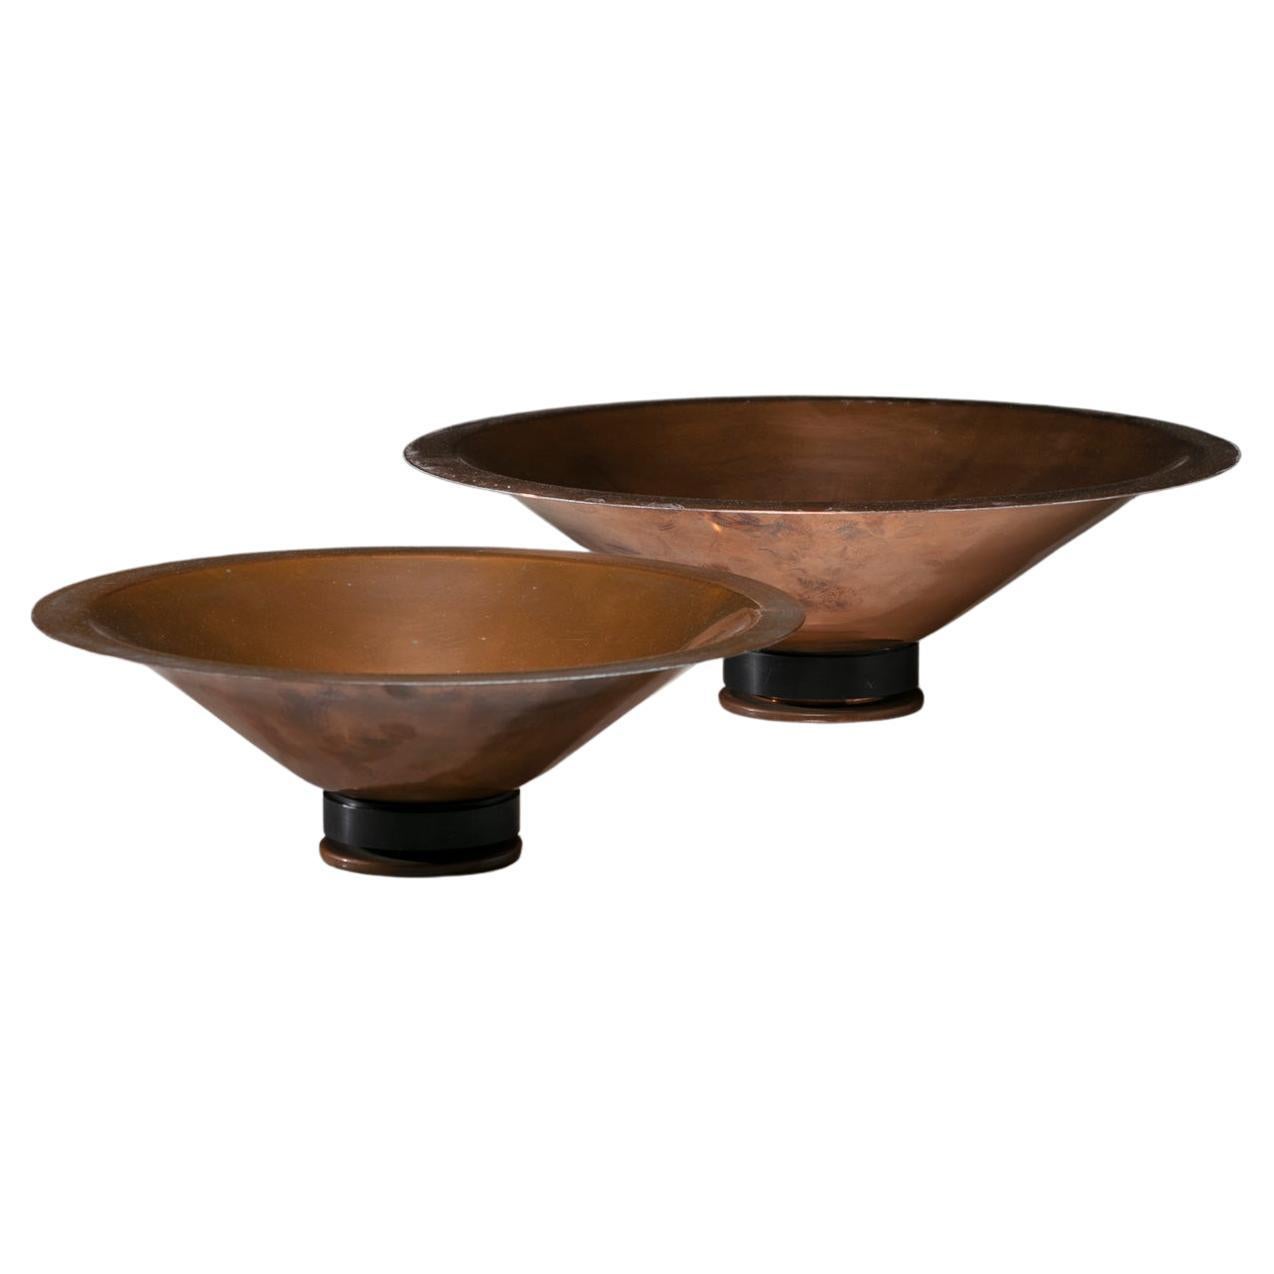 Set of Two Copper Centerpieces, Italy, 1970s